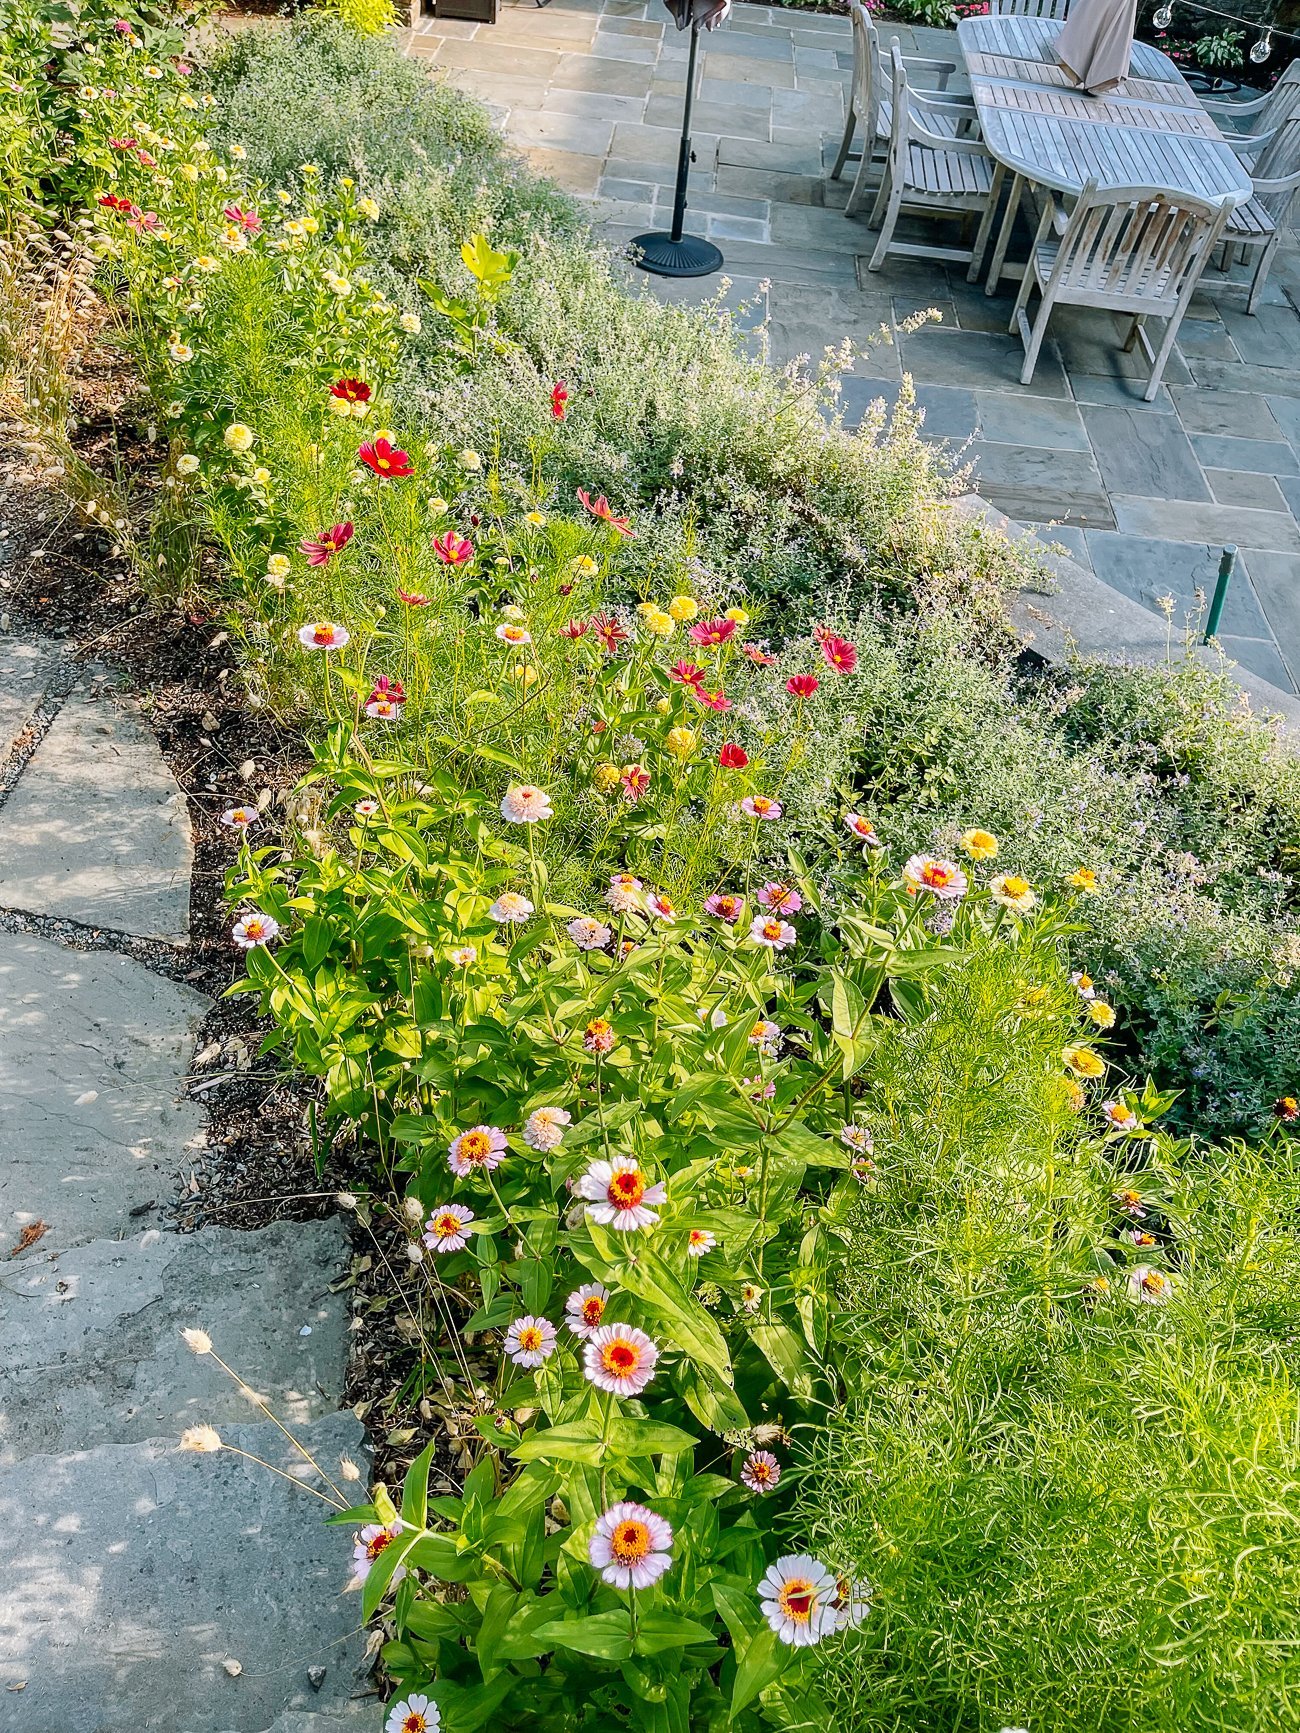 patch of zinnias and cosmos